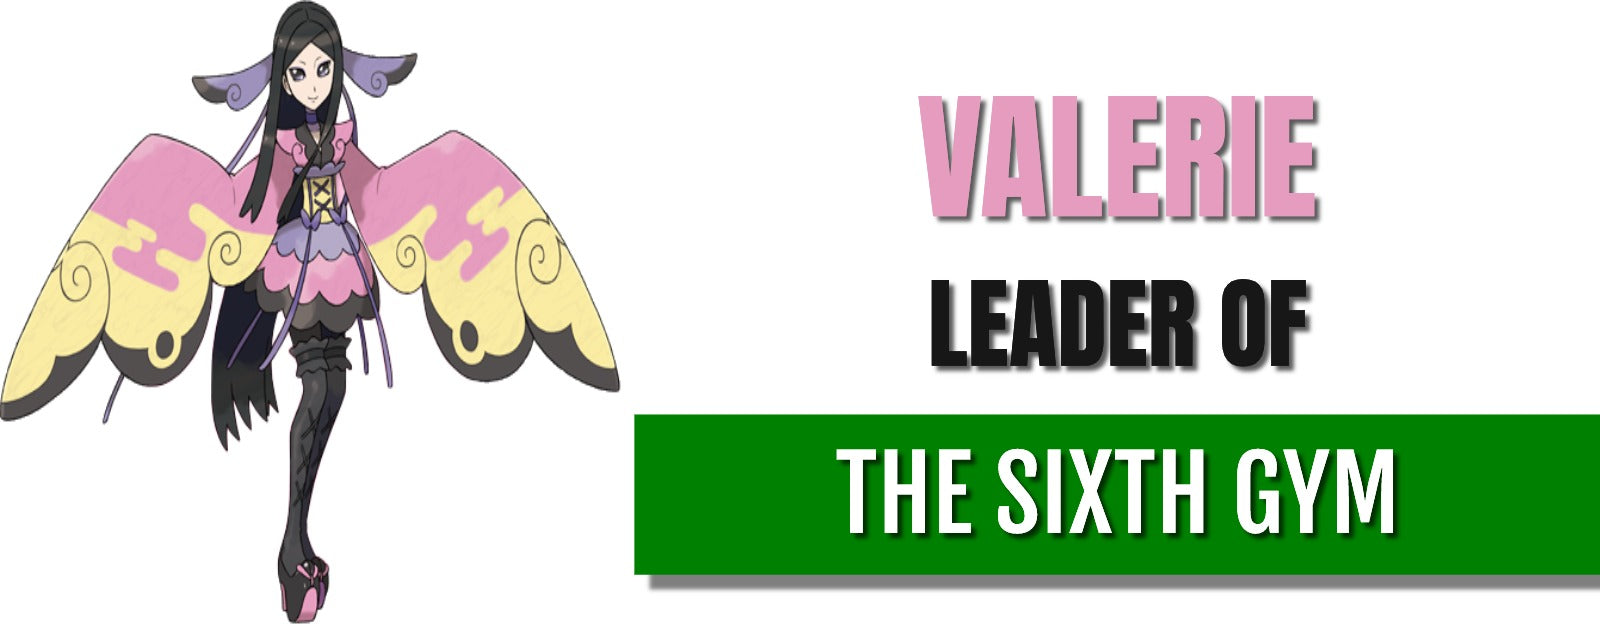 Valerie the leader of the sixth gym